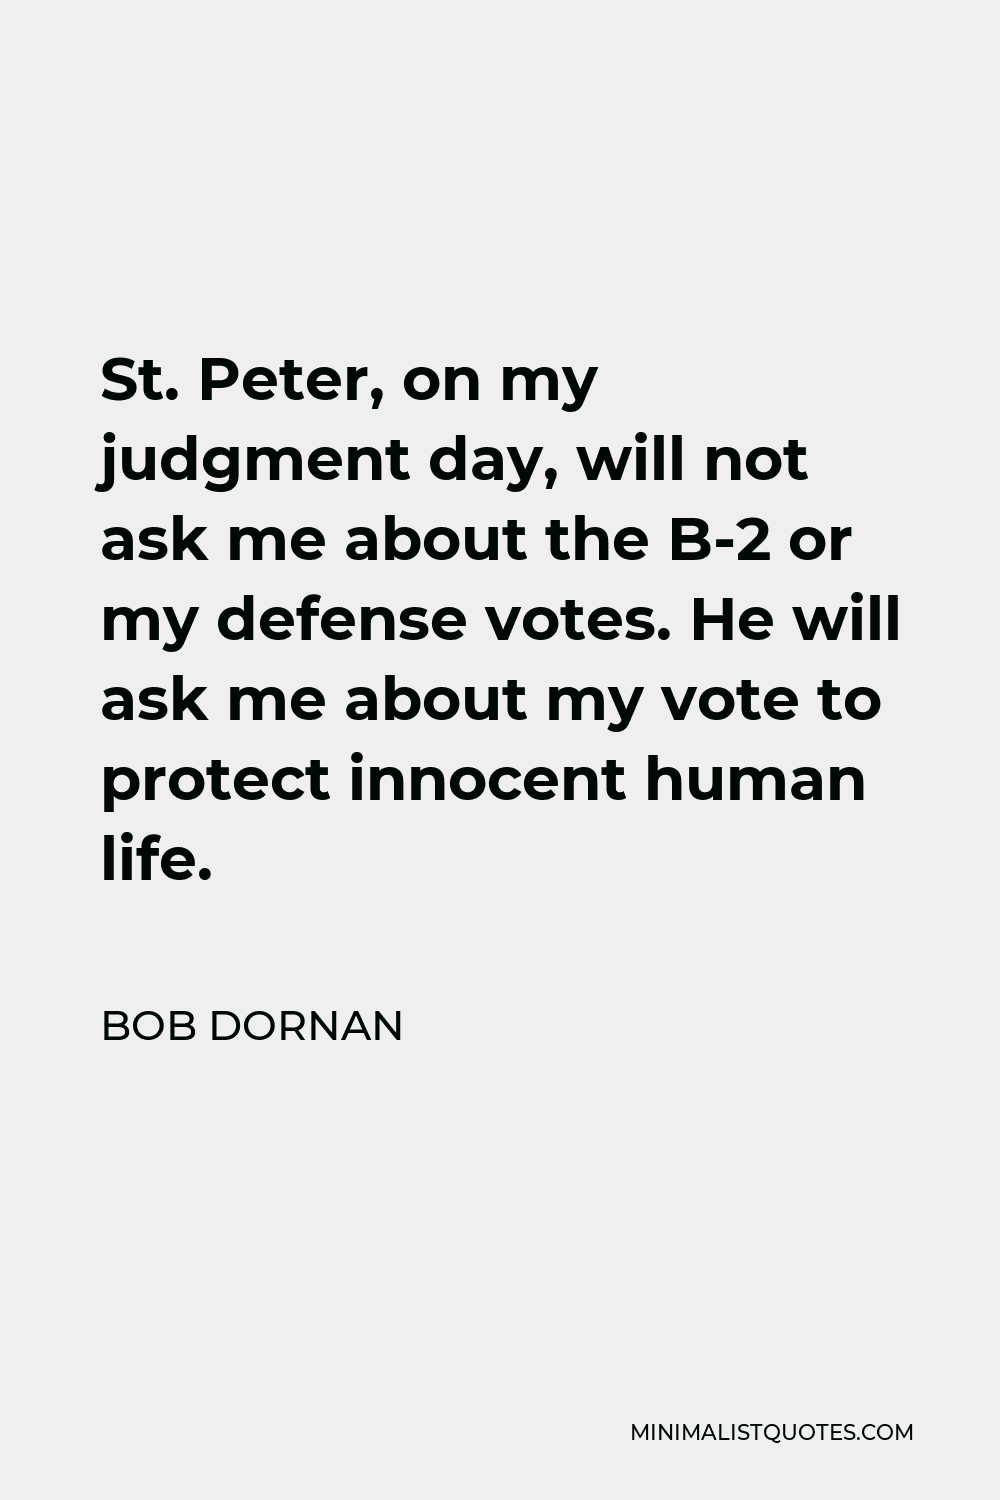 Bob Dornan Quote - St. Peter, on my judgment day, will not ask me about the B-2 or my defense votes. He will ask me about my vote to protect innocent human life.